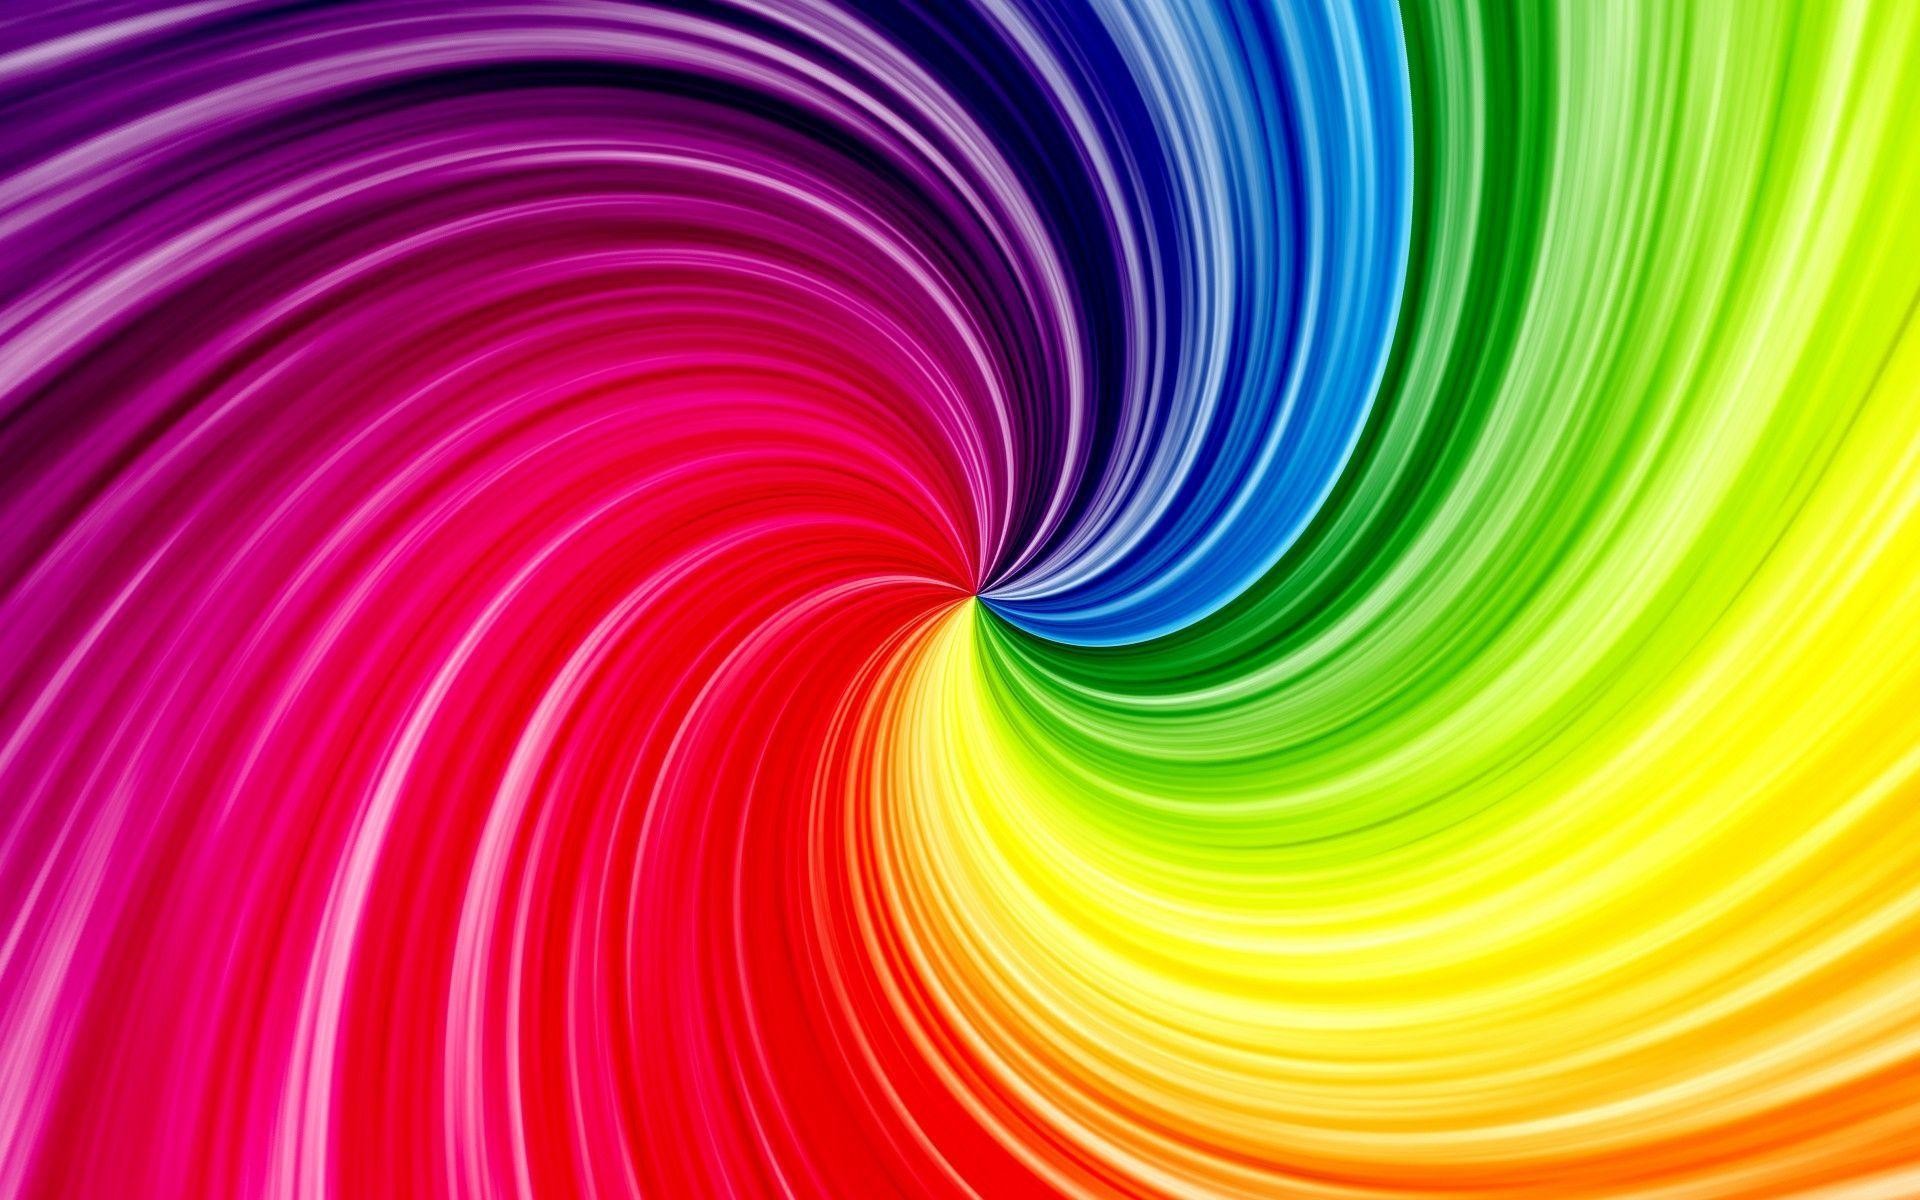 1920x1200 Bright Colorful Waves 308156 Images HD Wallpapers| Wallfoy.